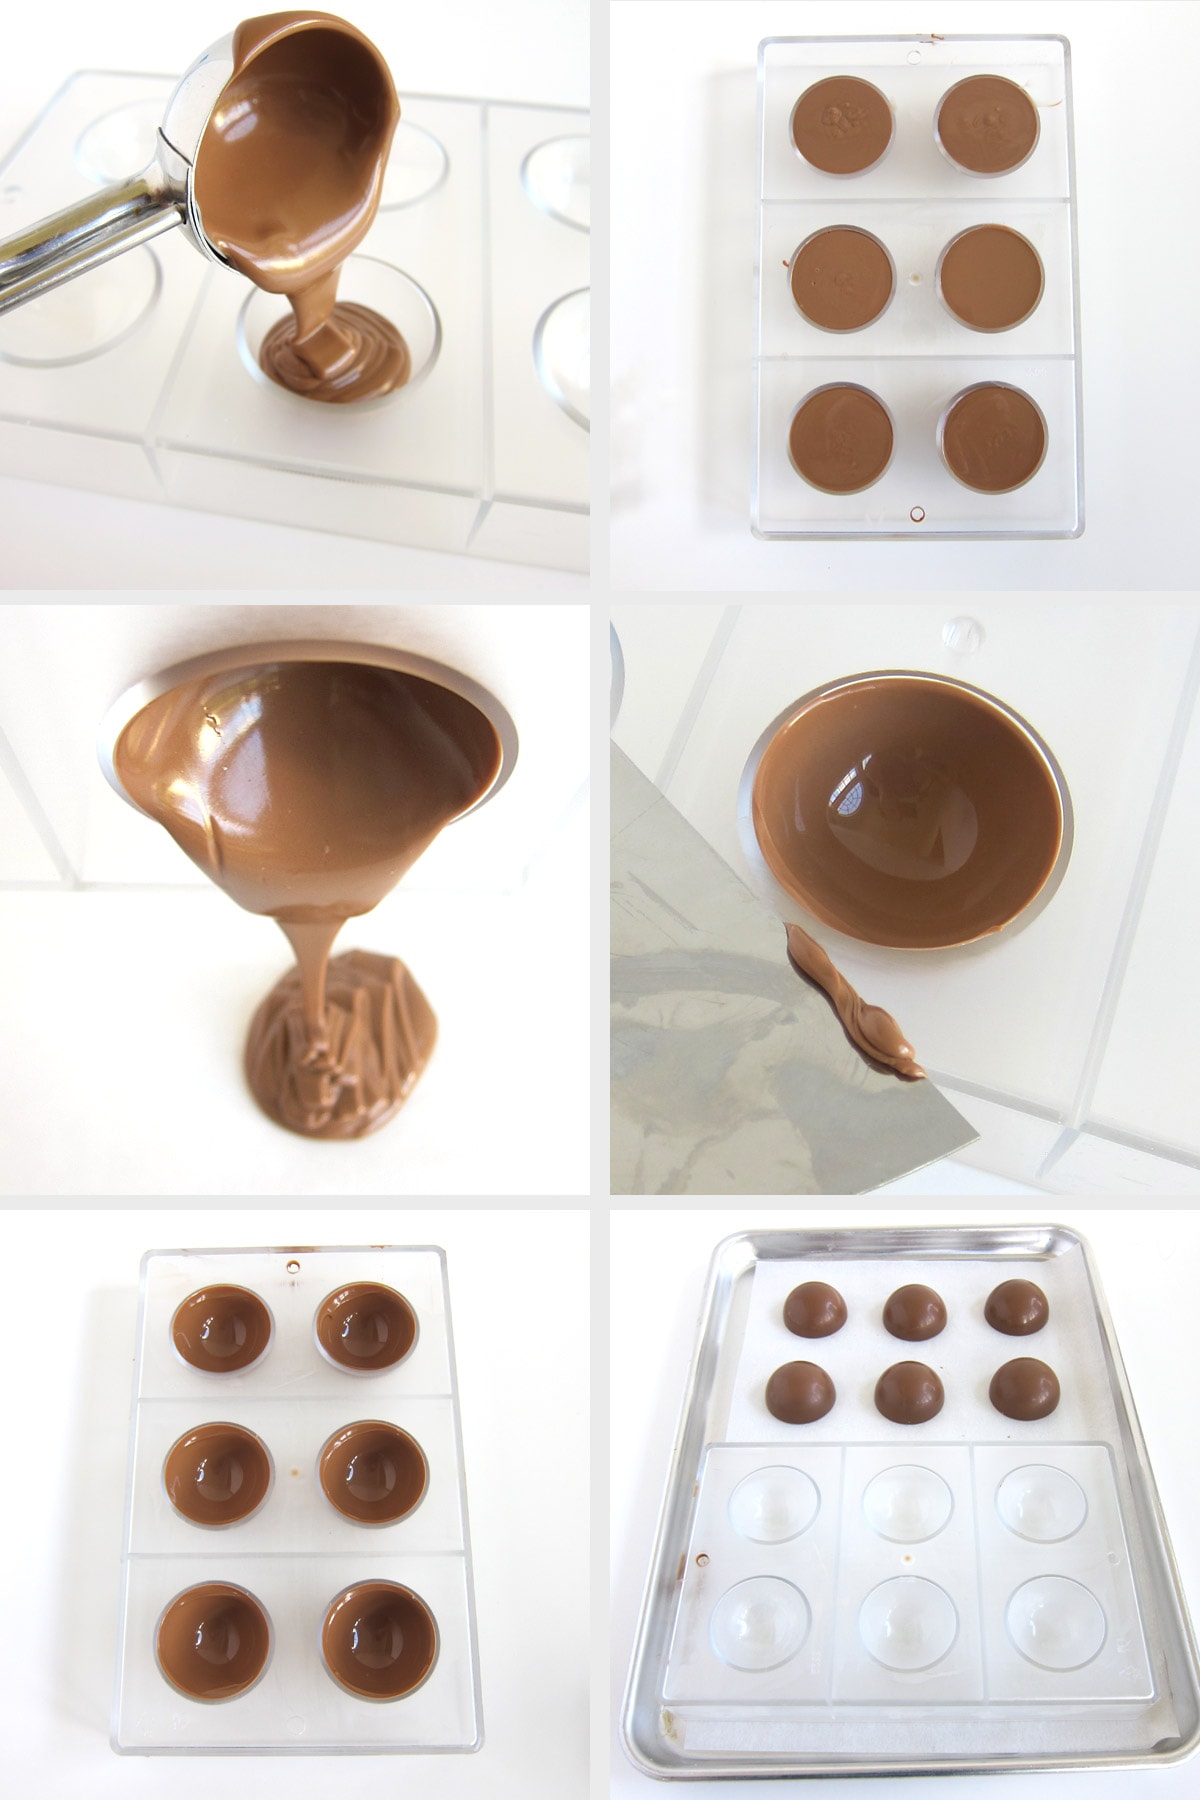 Fill half-sphere molds with milk chocolate, then drain out excess, chill, then un-mold to make hot chocolate bombs.